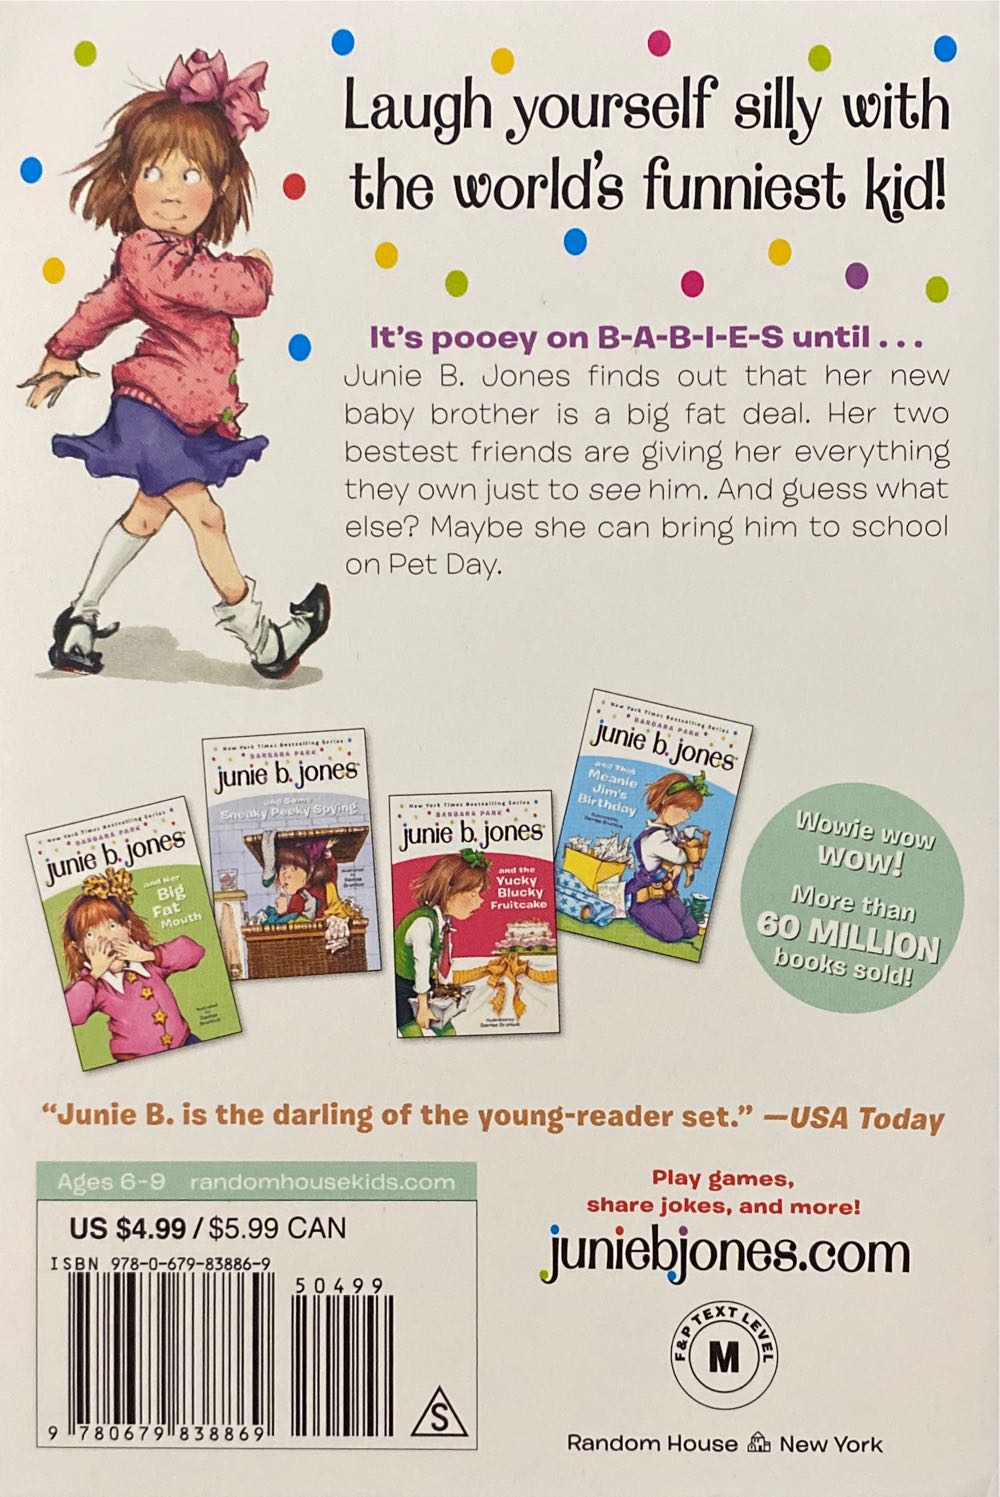 Junie B. Jones #2: And A Little Monkey Business - Barbara Park (Random House Books for Young Readers - Paperback) book collectible [Barcode 9780679838869] - Main Image 2